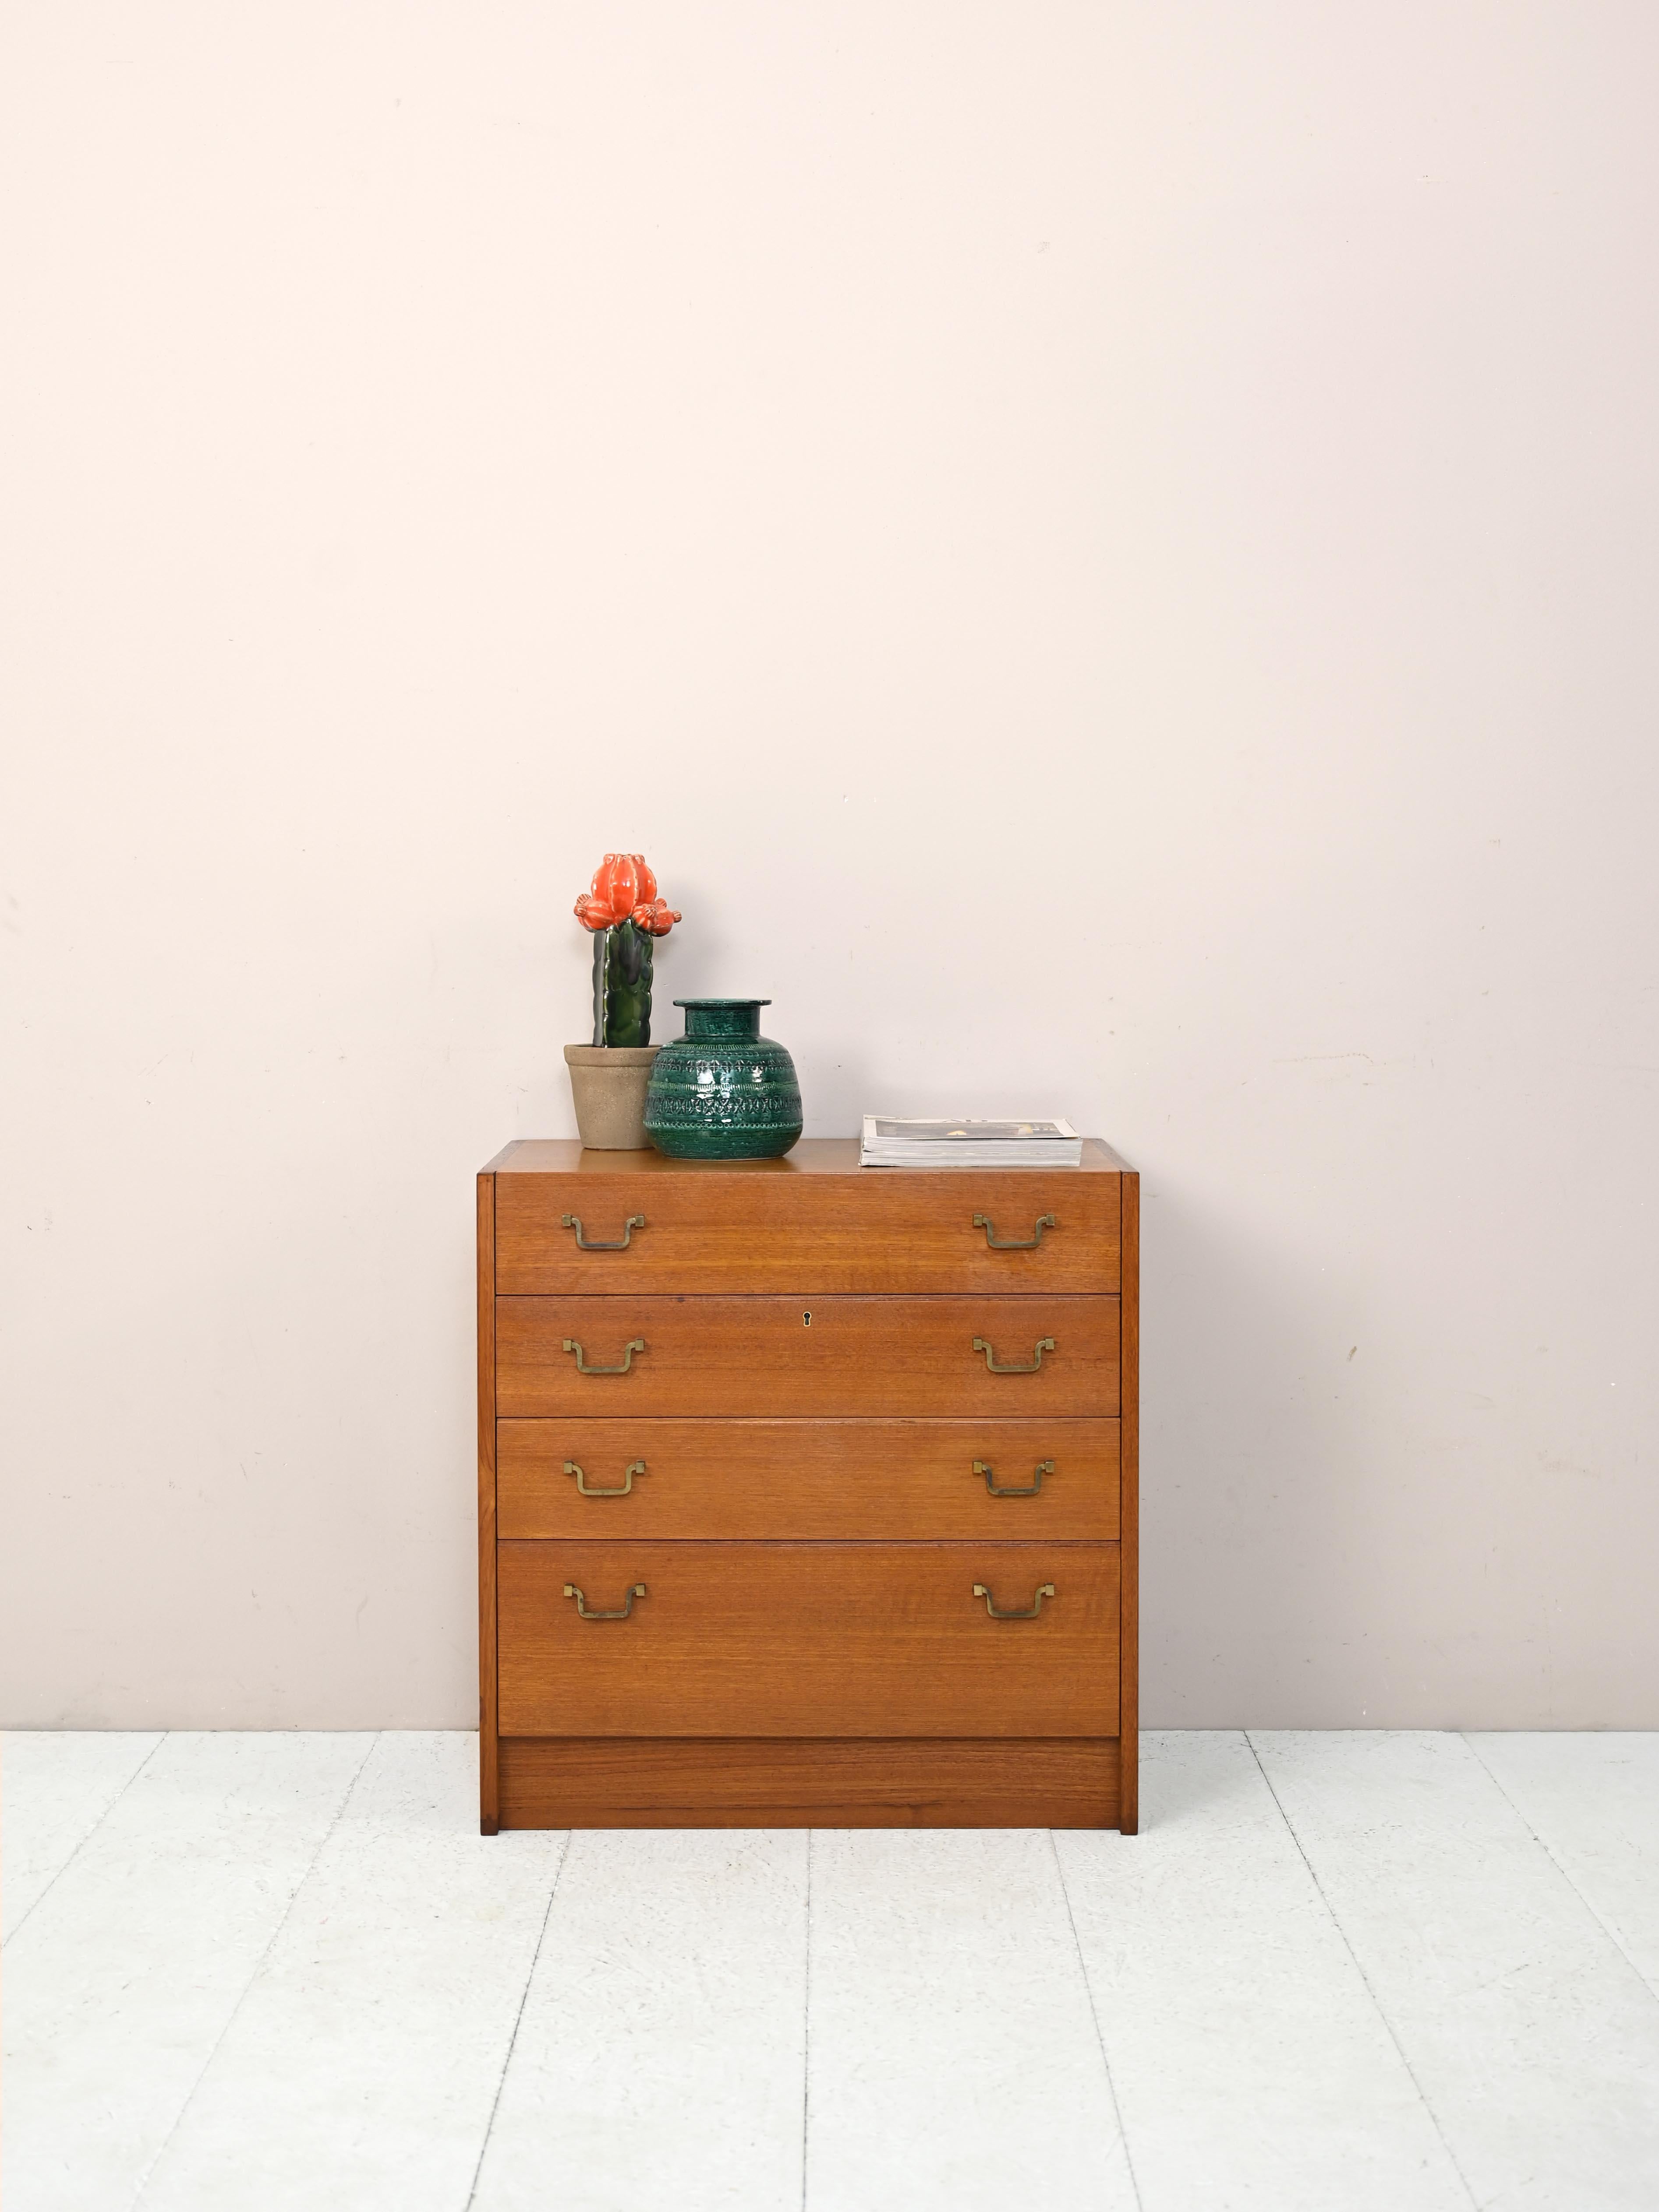 1960s teak cabinet with 4 drawers.

This chest of drawers is distinguished by the shape of the base that rests directly on the floor without the presence of legs. The linear structure and golden handles on the drawers make it a modern and elegant